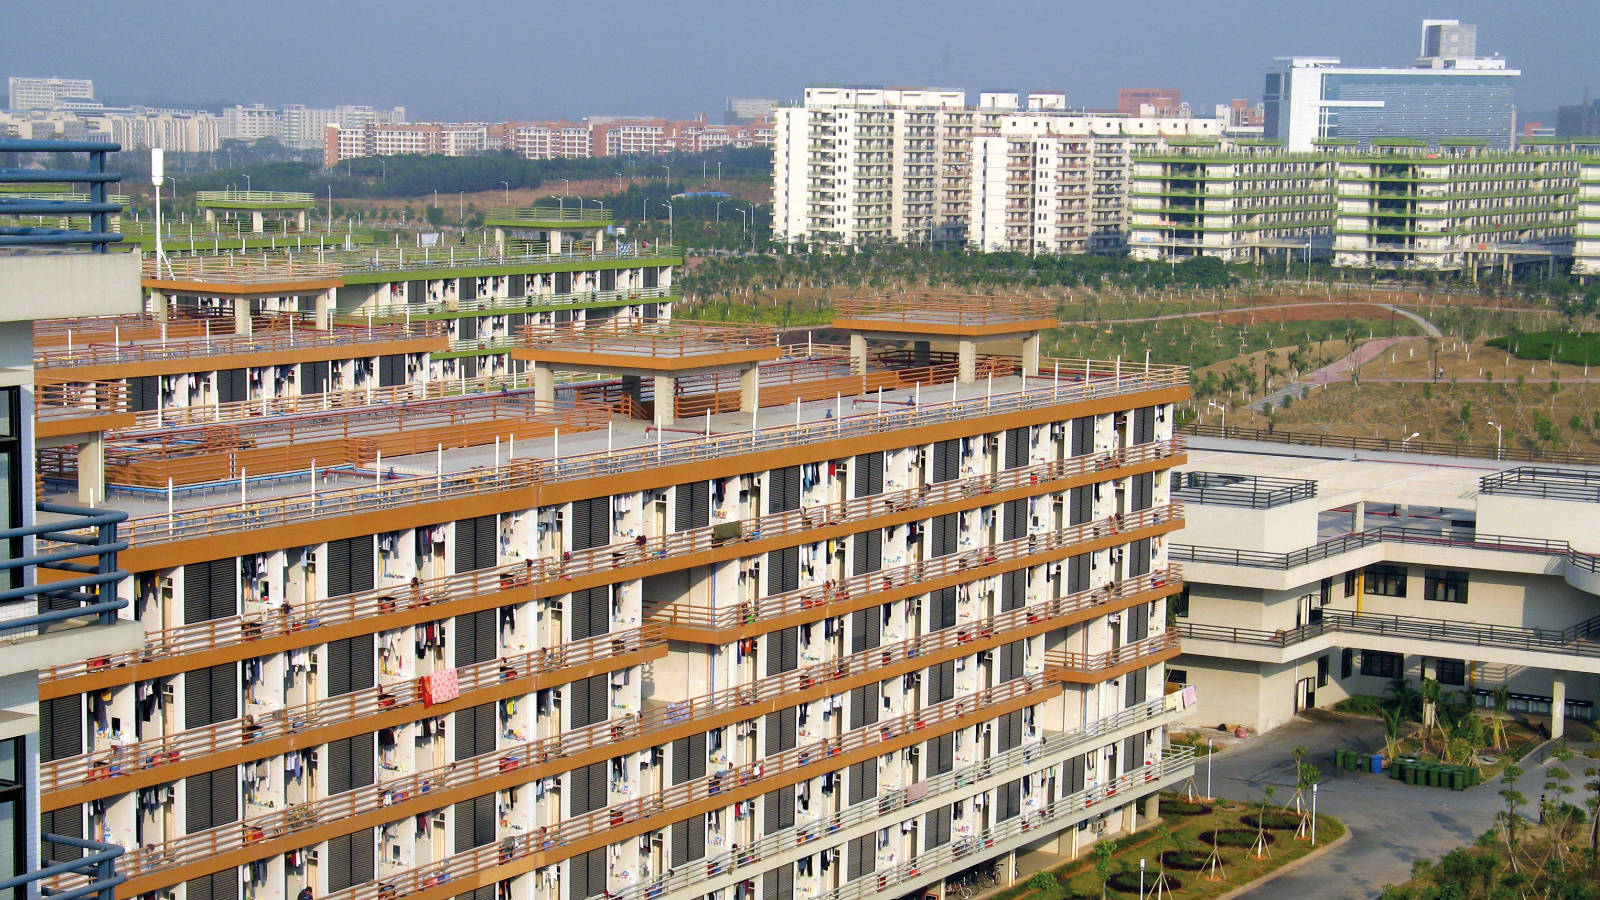 Large-scale residential projects in Guangzhou